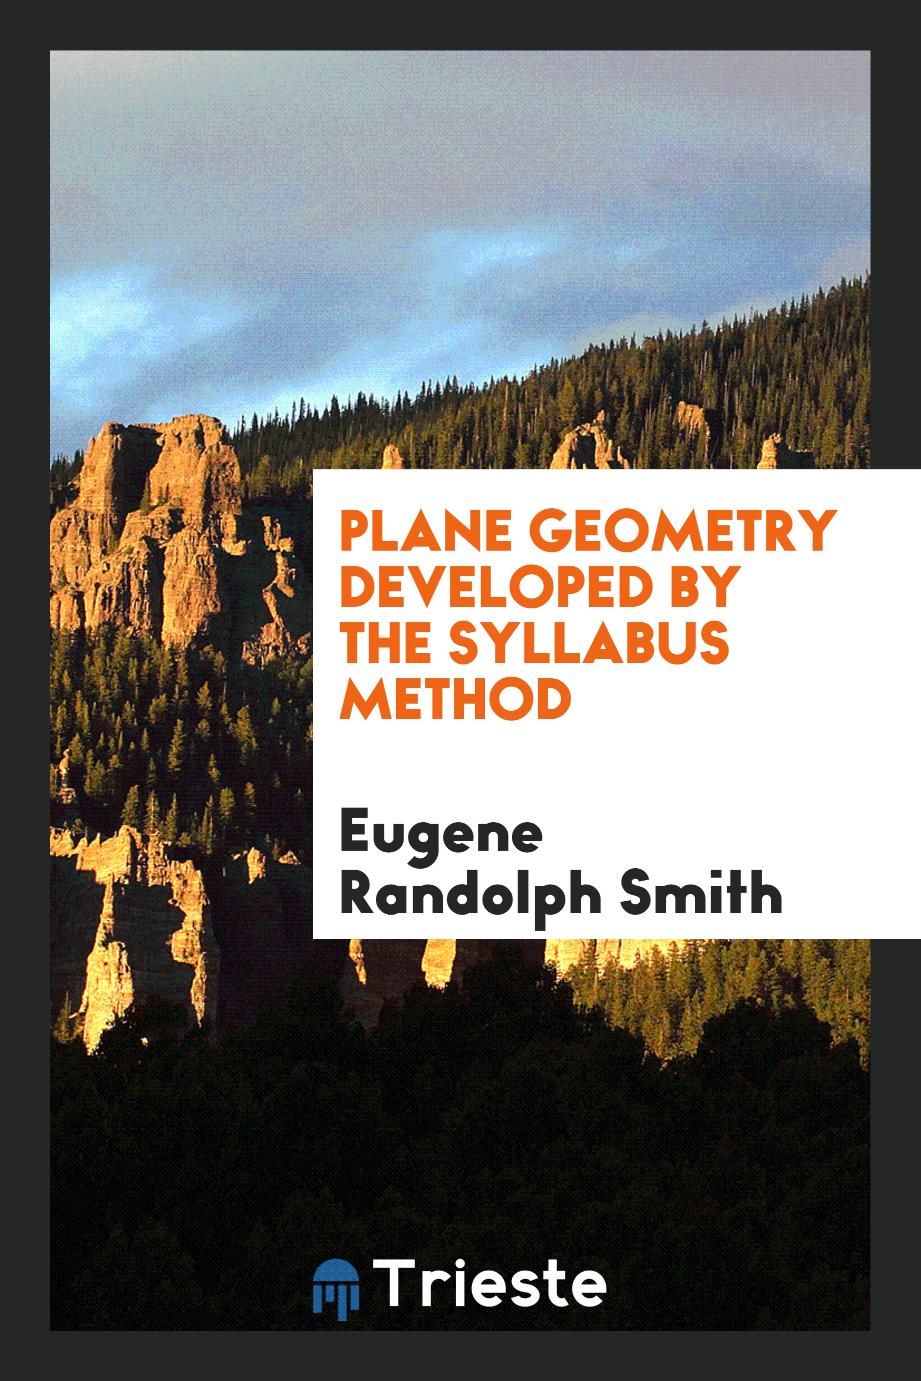 Plane geometry developed by the syllabus method